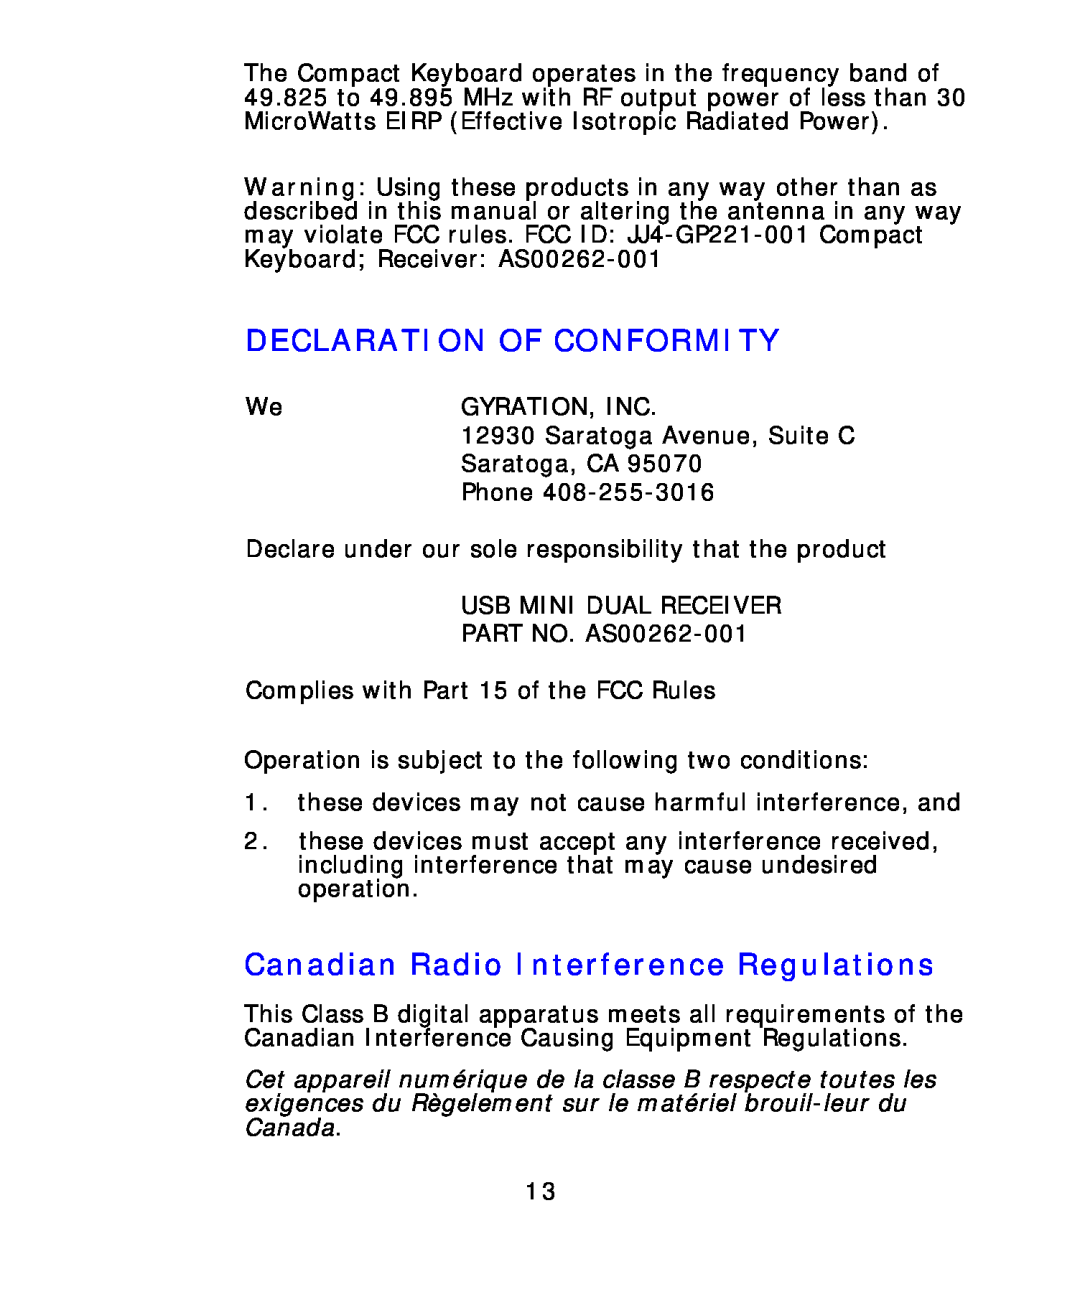 Gyration Compact Keyboard user manual Declaration Of Conformity, Canadian Radio Interference Regulations 